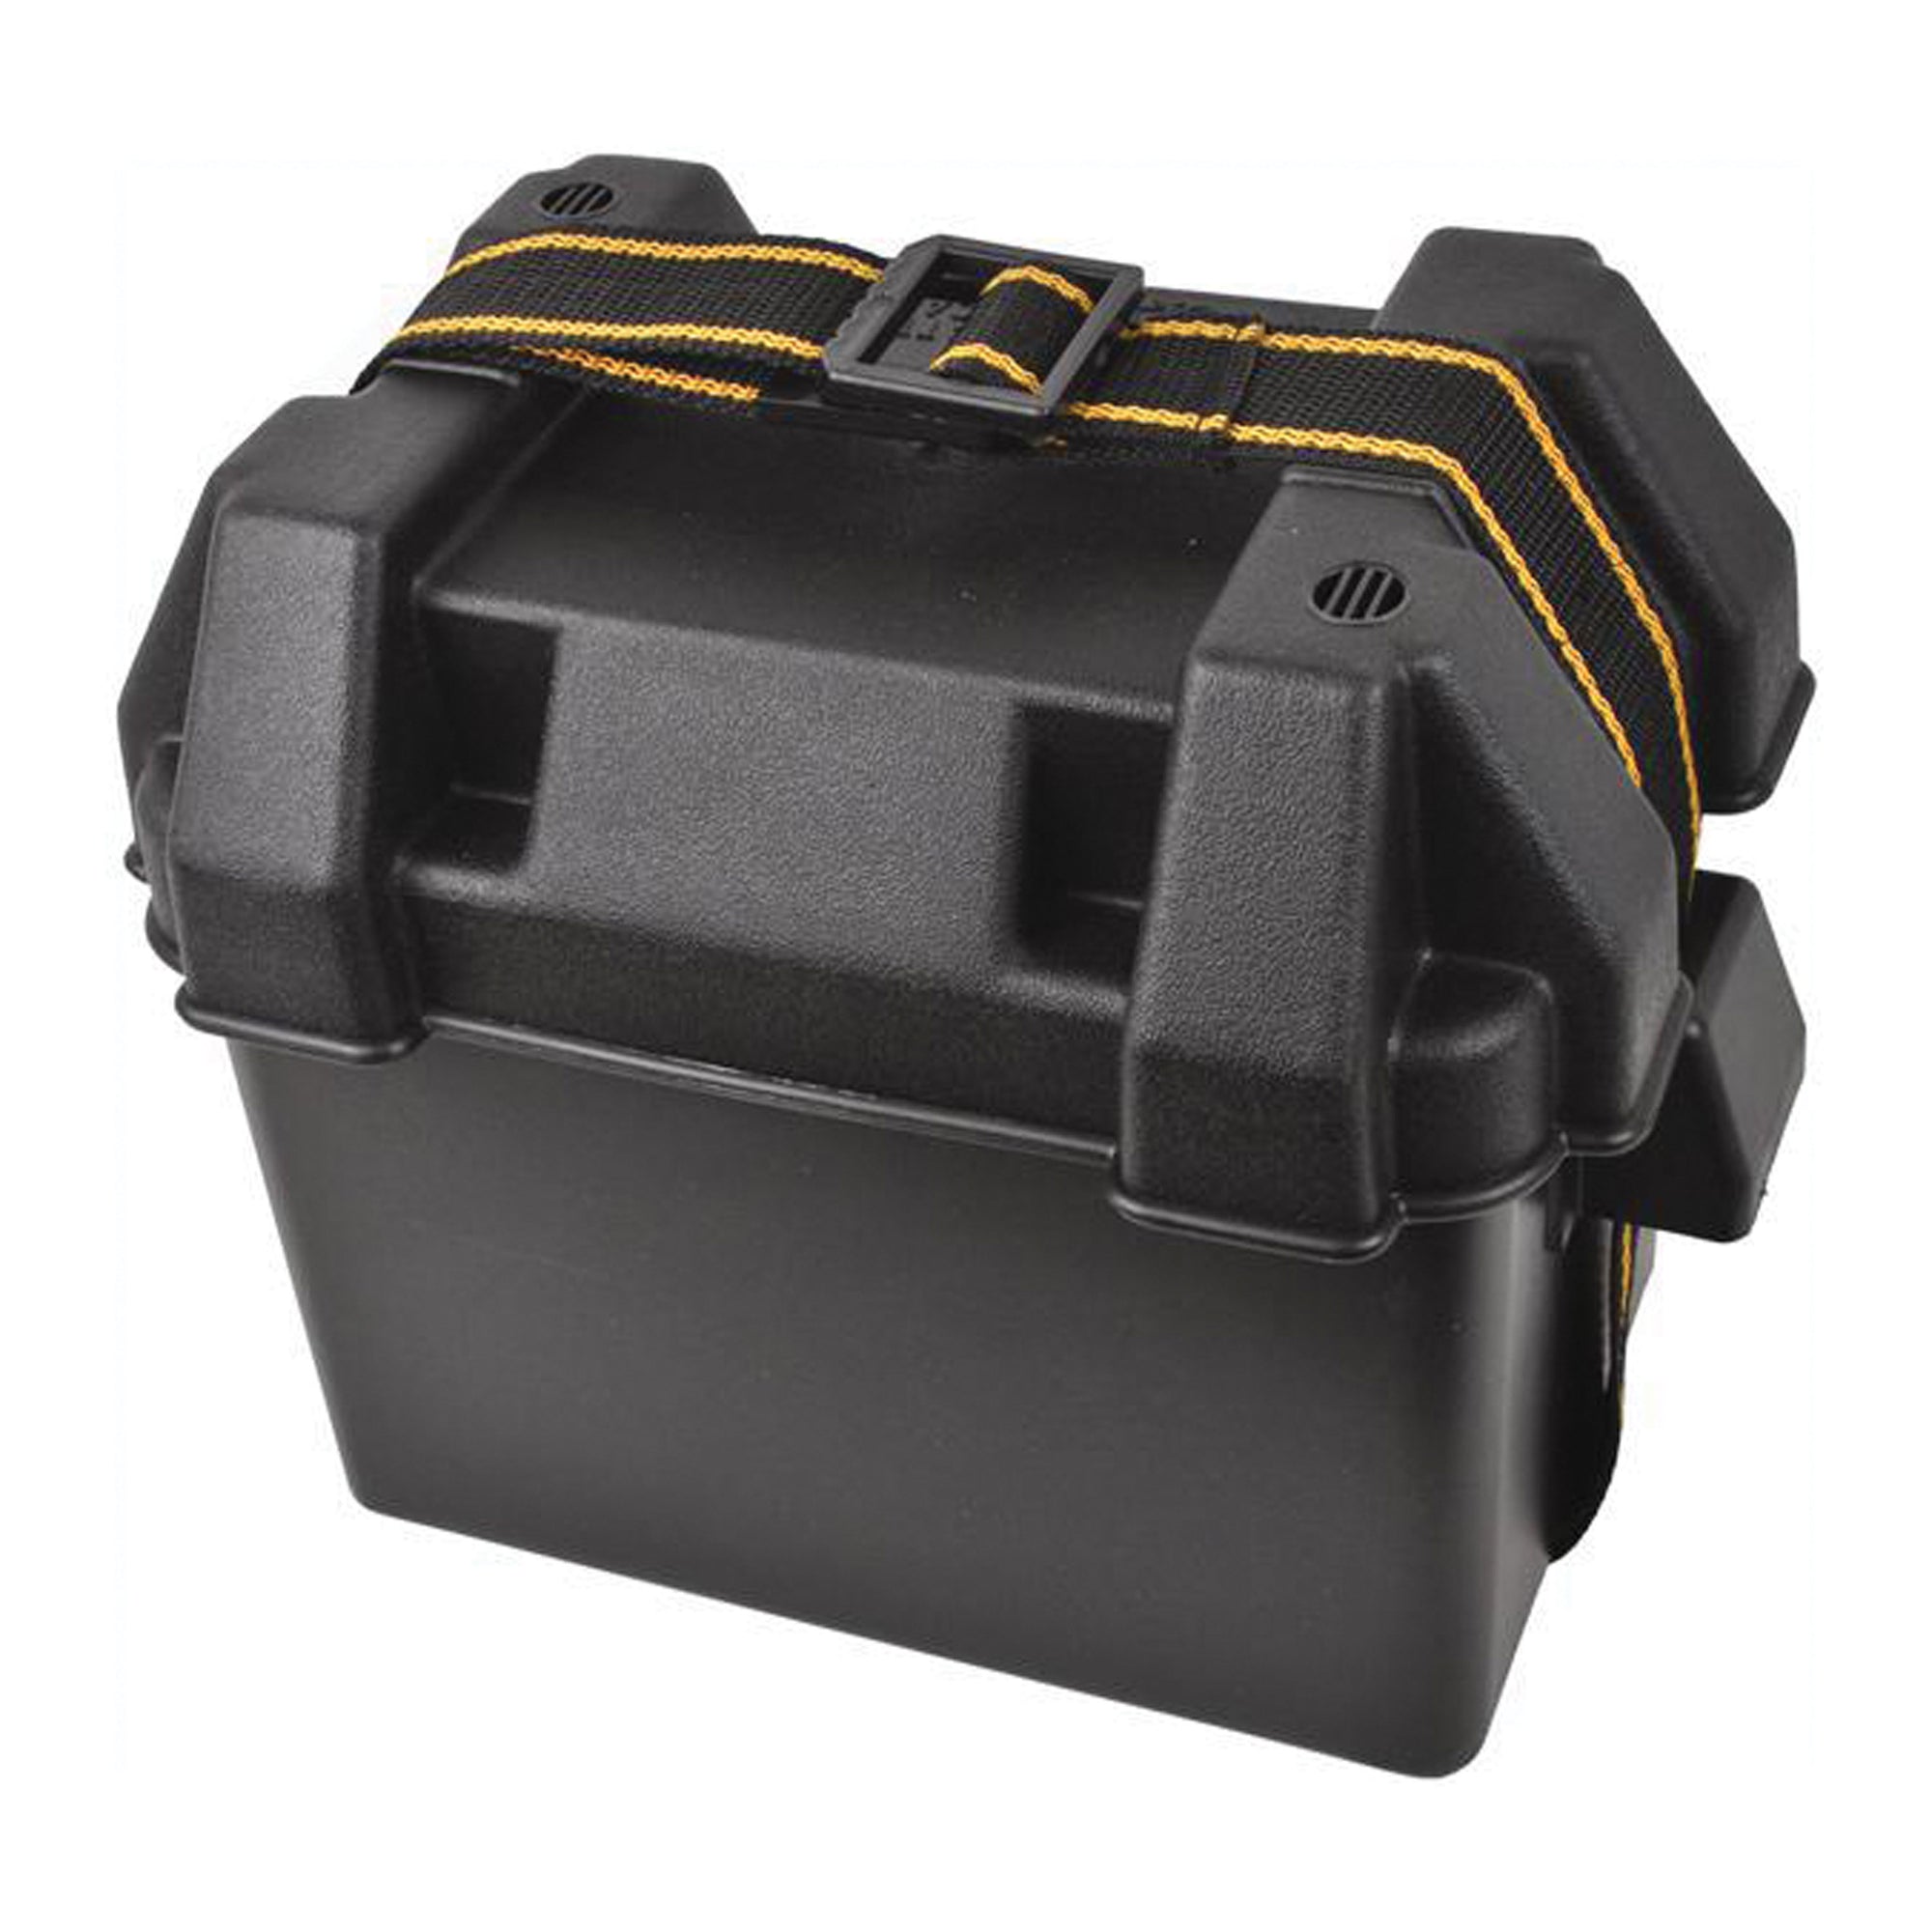 Attwood 9067-1 Battery Box - Group 27,30 and 31, Vented